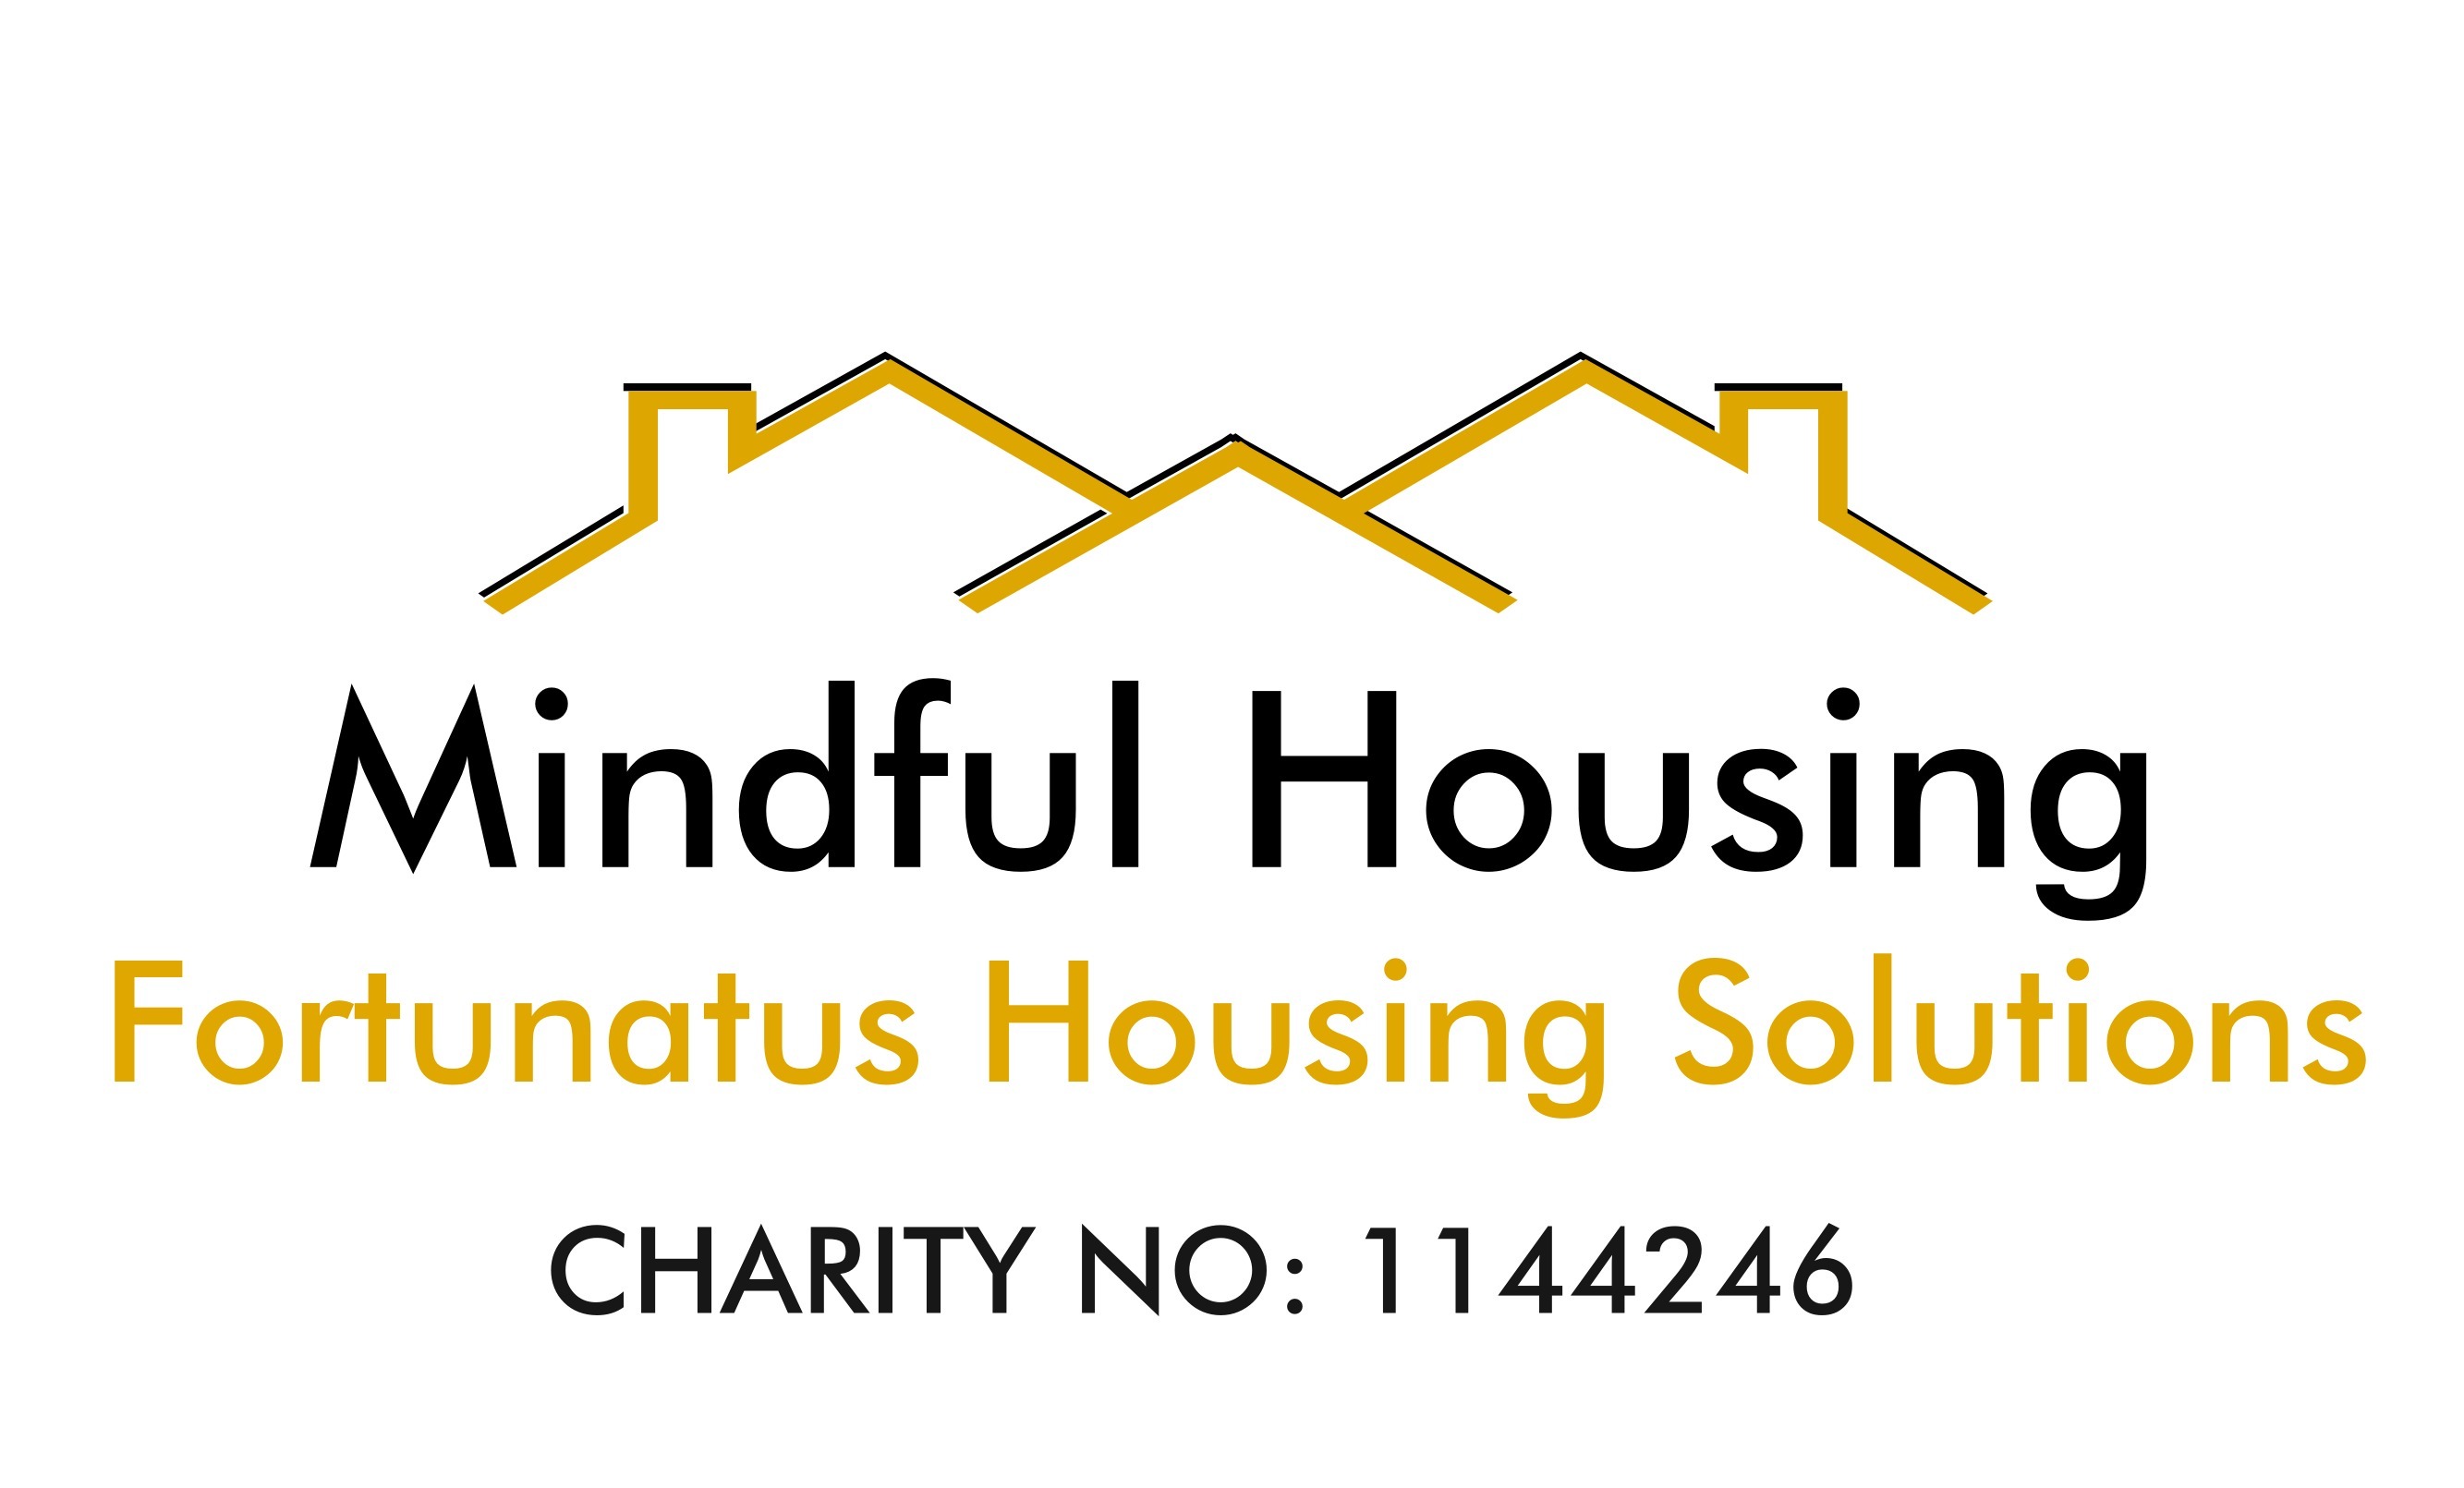 Mindful Housing - Fortunatus Housing Solutions